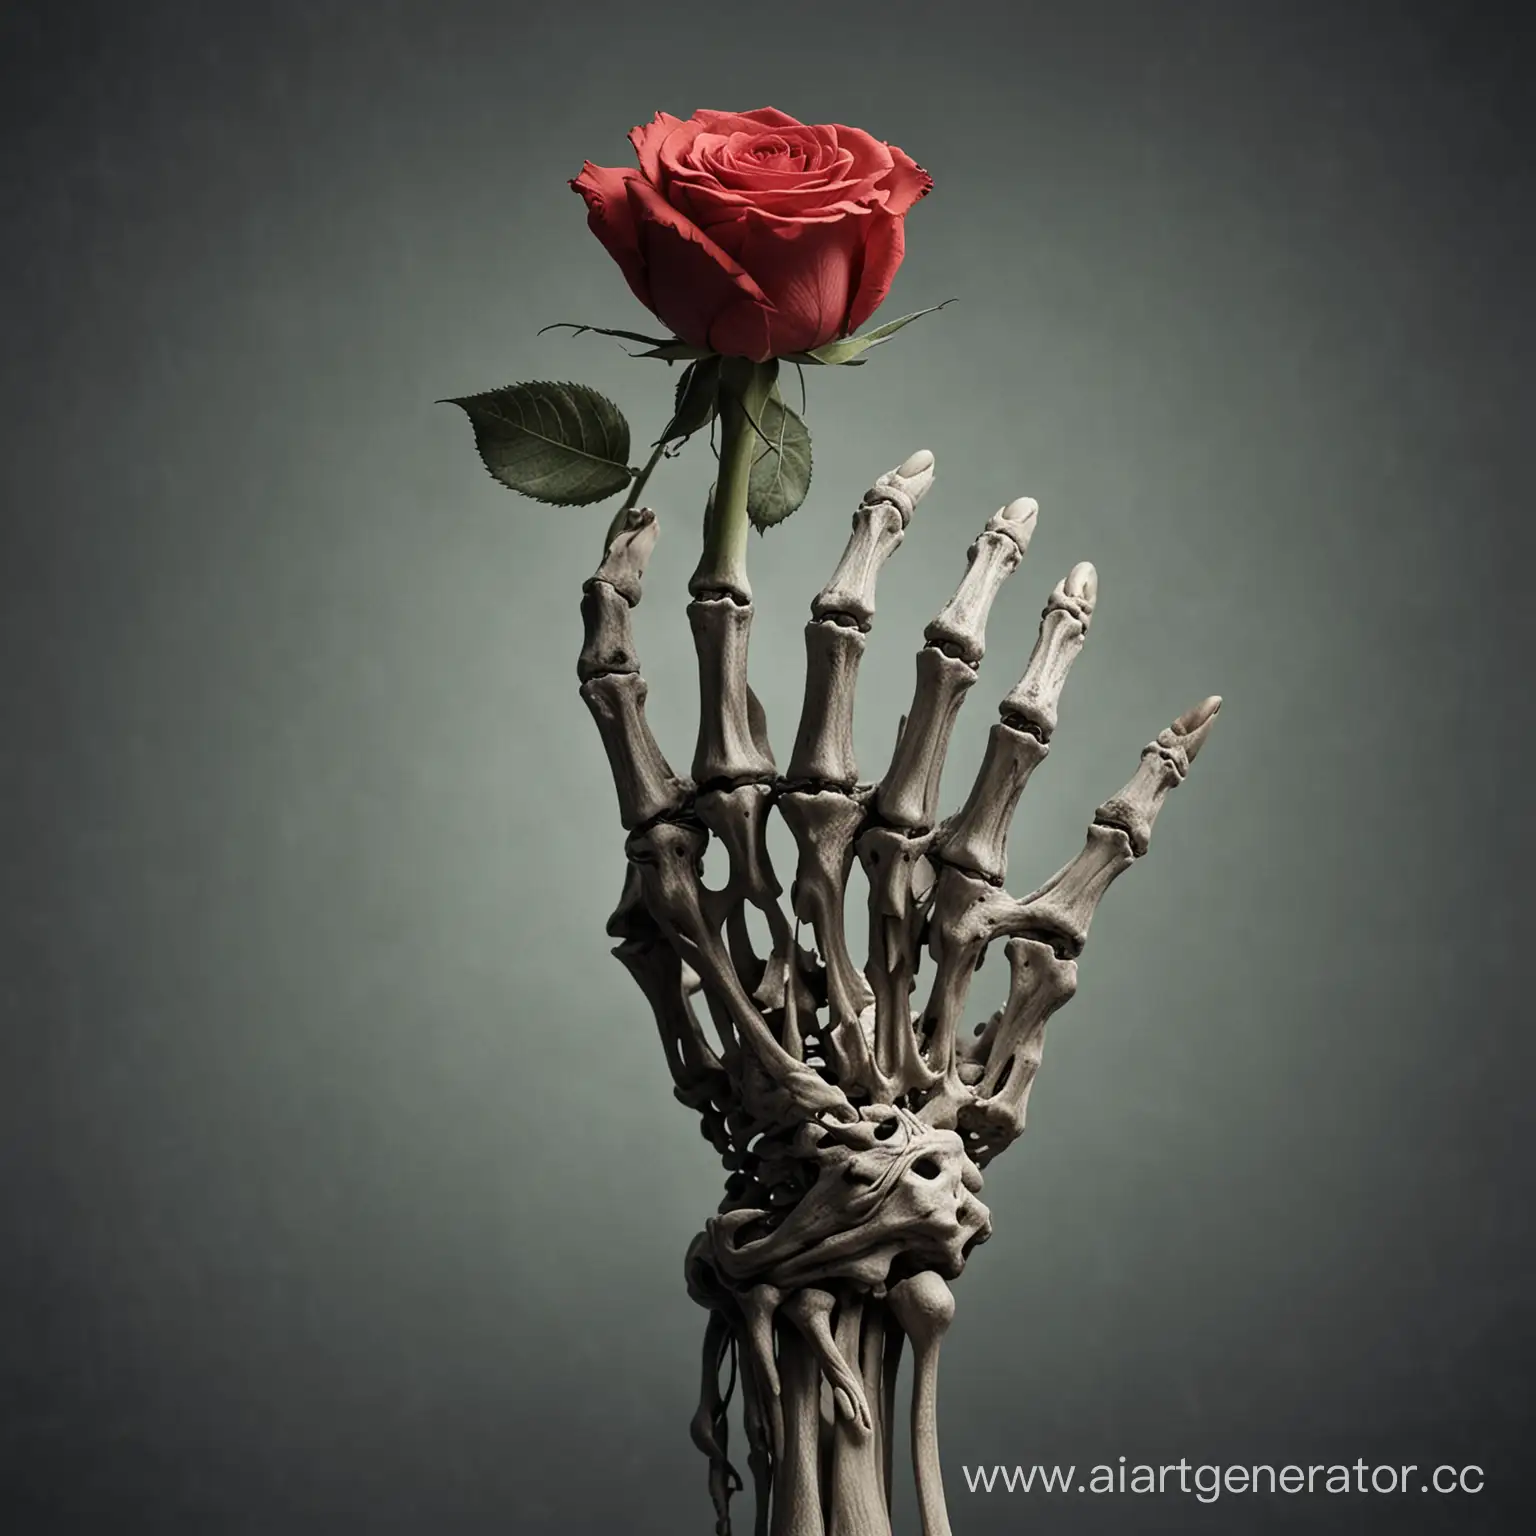 
The skeleton's hand holds a rose